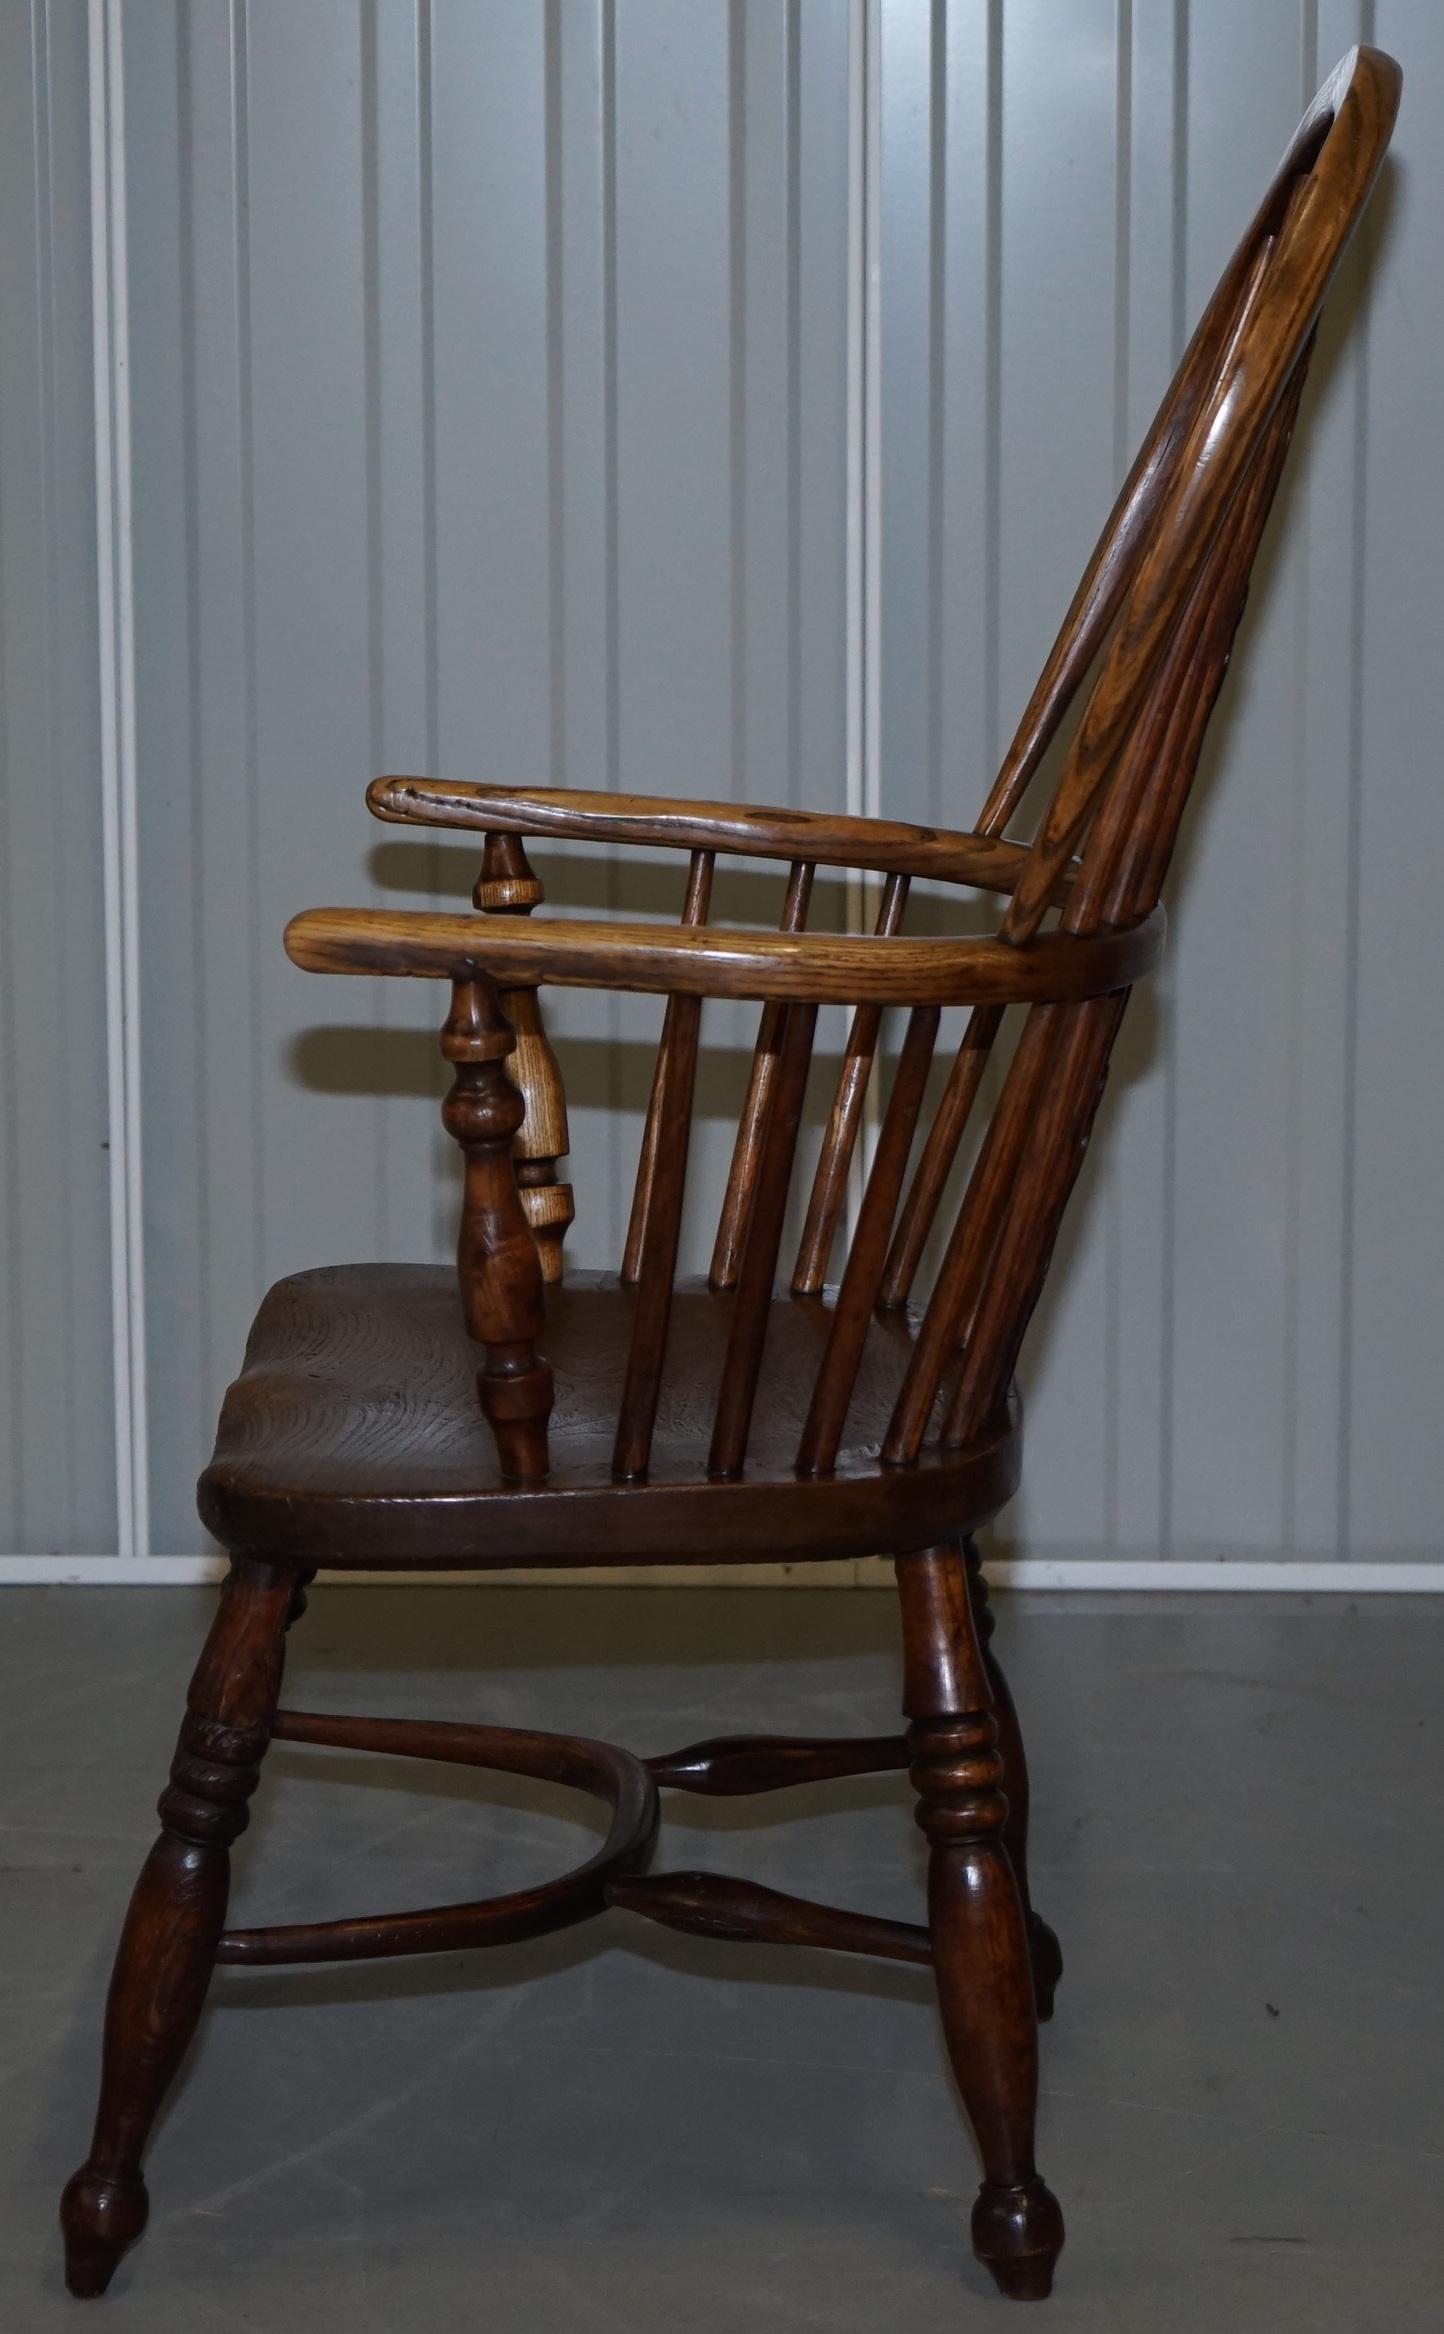 English Classic Antique 19th Century Elm Hoop Back West Country Windsor Armchair For Sale 8